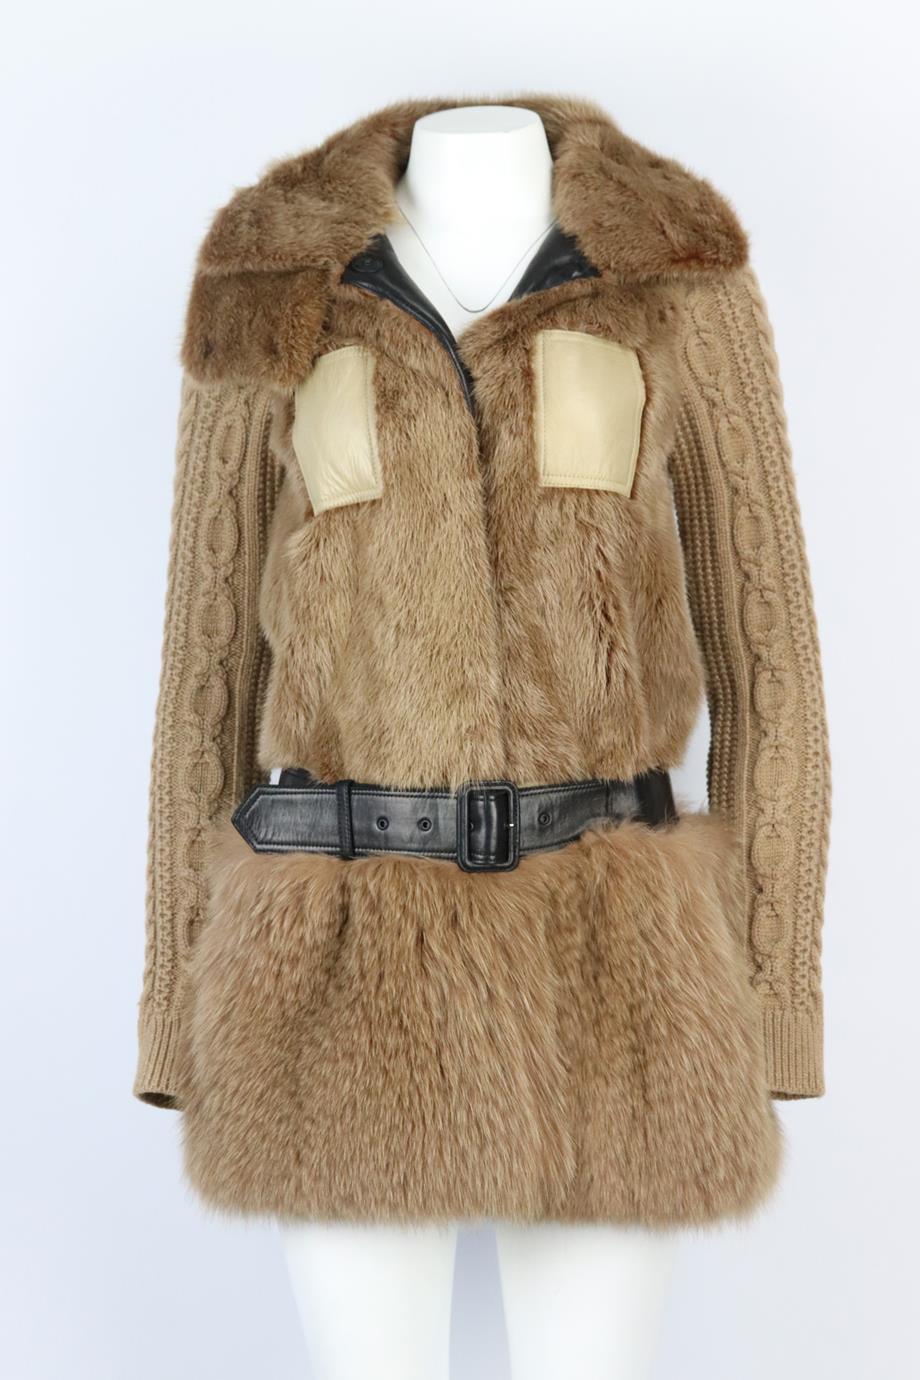 Burberry Prorsum belted fox fur and cable knit cashmere coat. Brown. Long sleeve, crewneck. Button and belt fastening at front. 100% Fox fur; lining: 100% viscose; trim: 100% cashmere; accessories: 100% leather. Size: IT 38 (UK 6, US 2, FR 34).